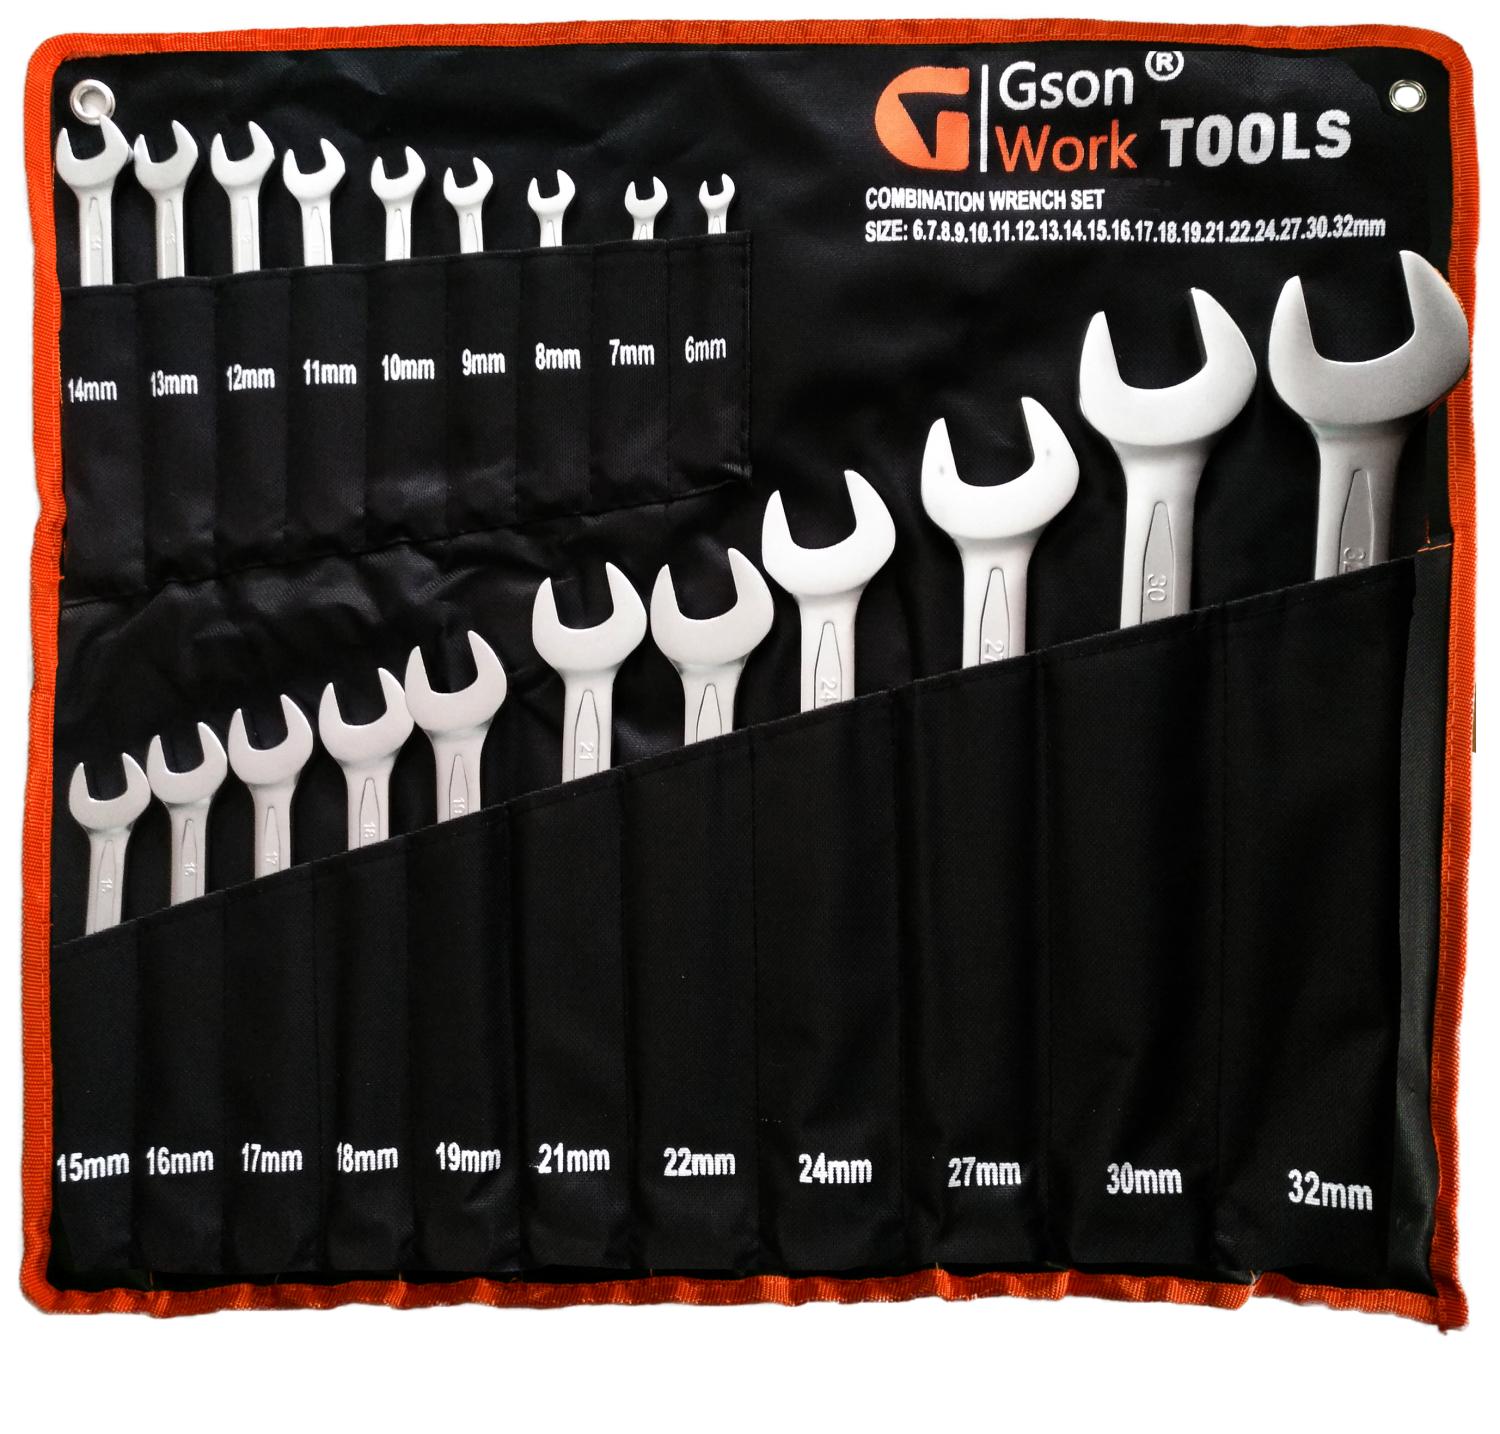 Combination Wrench Set 6-32 mm